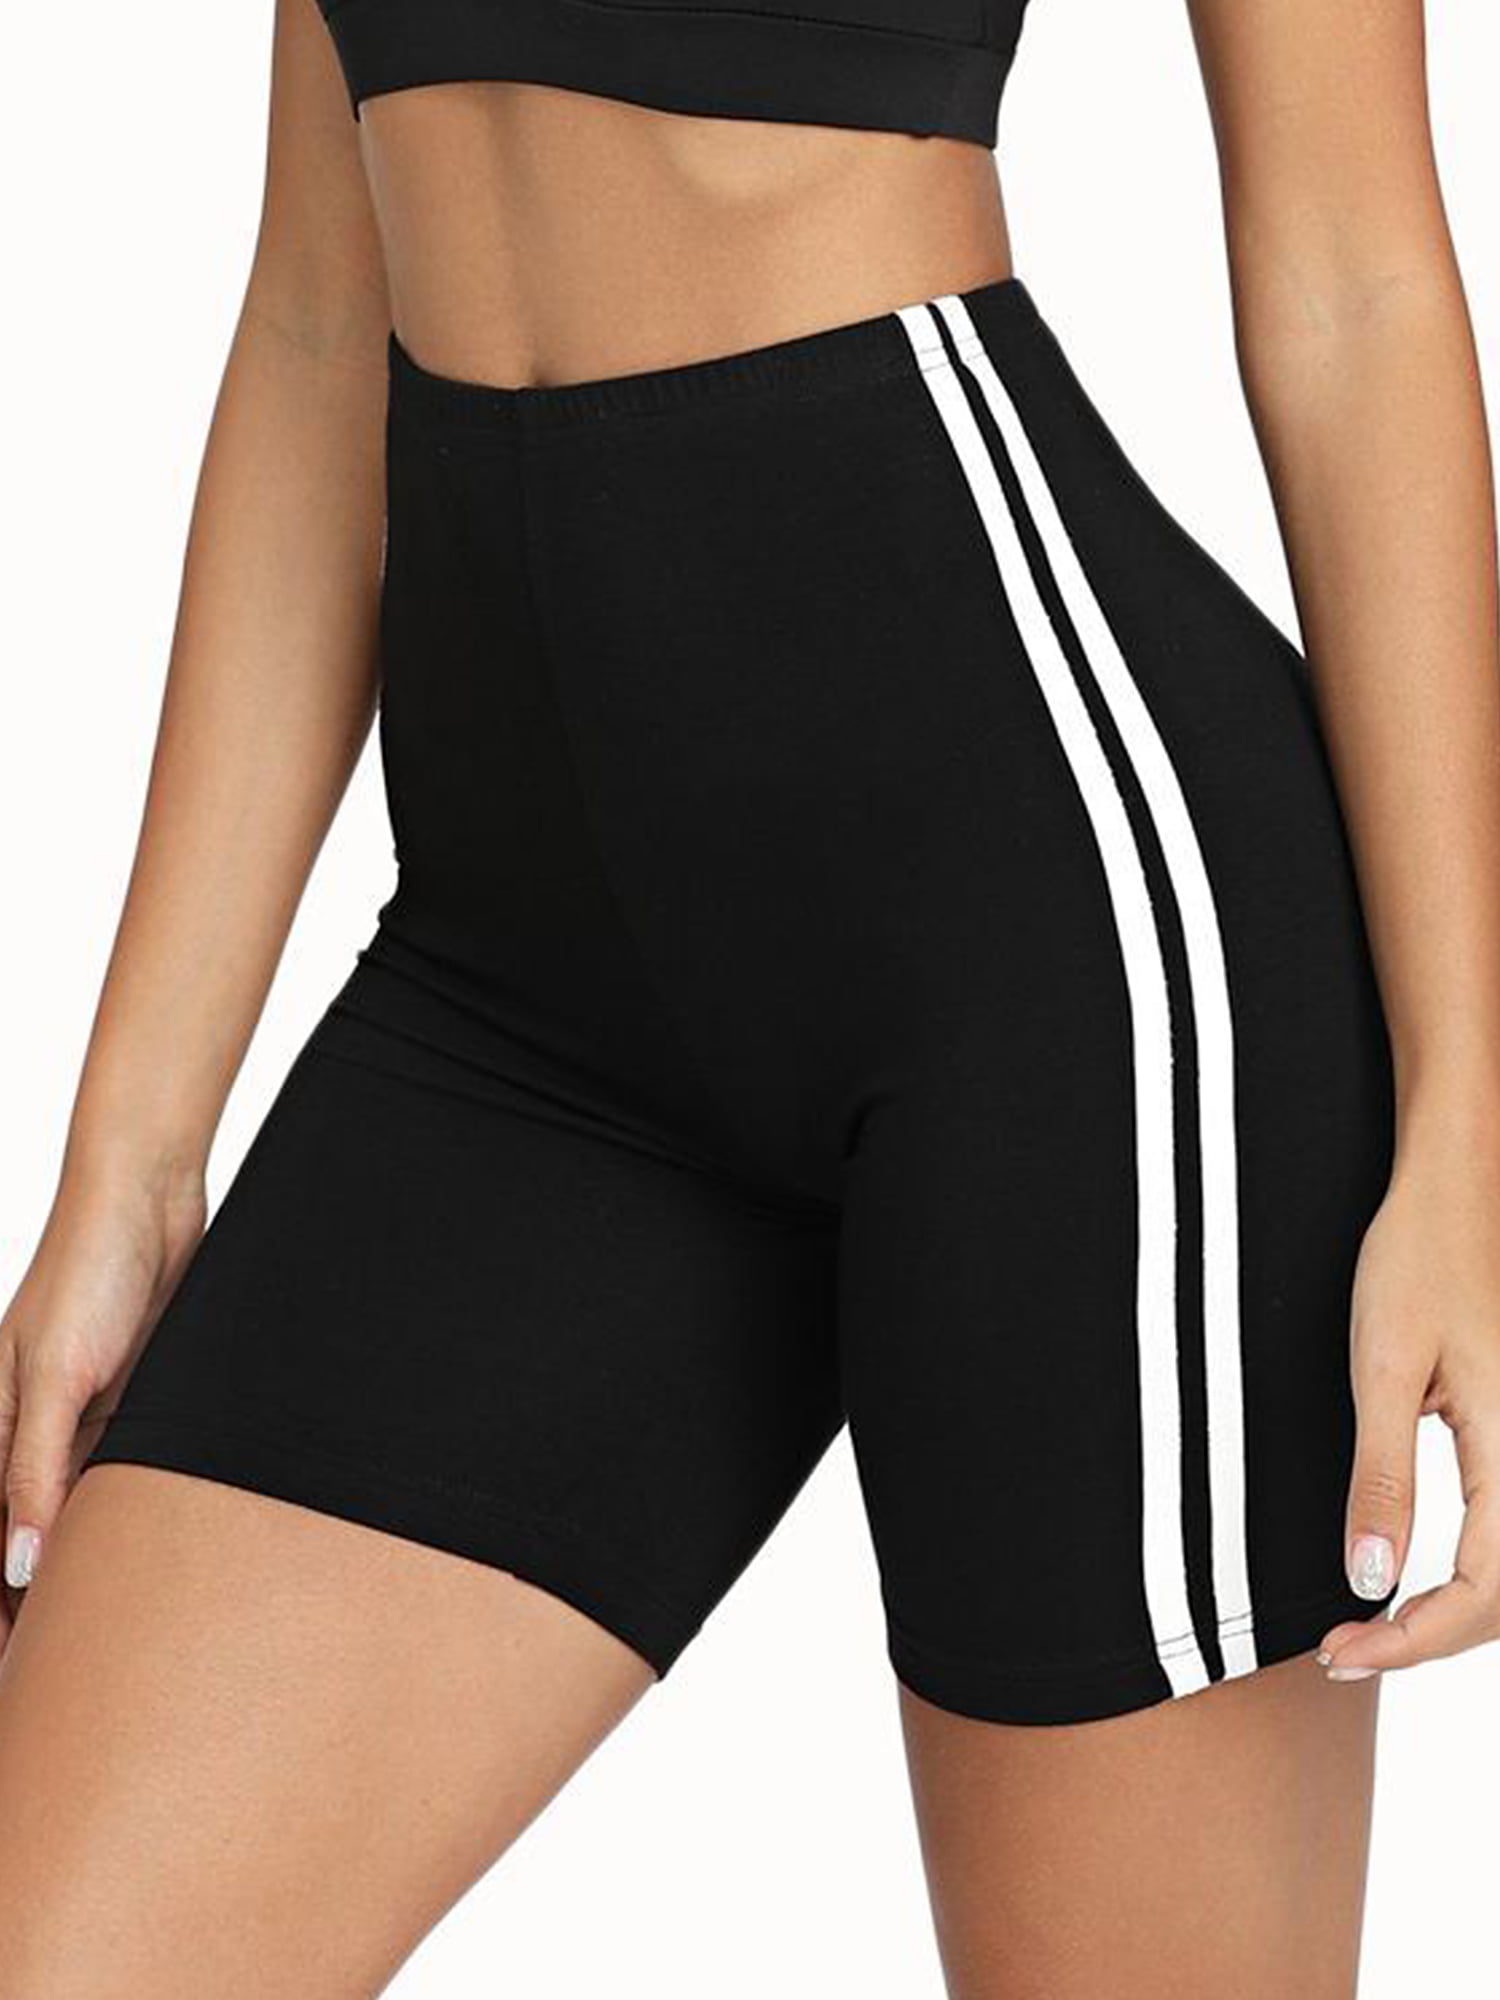 CTHH 3 Pack Biker Shorts for Women-High Waisted Workout Running Athletic Shorts for Women Yoga Gym Womens Shorts 